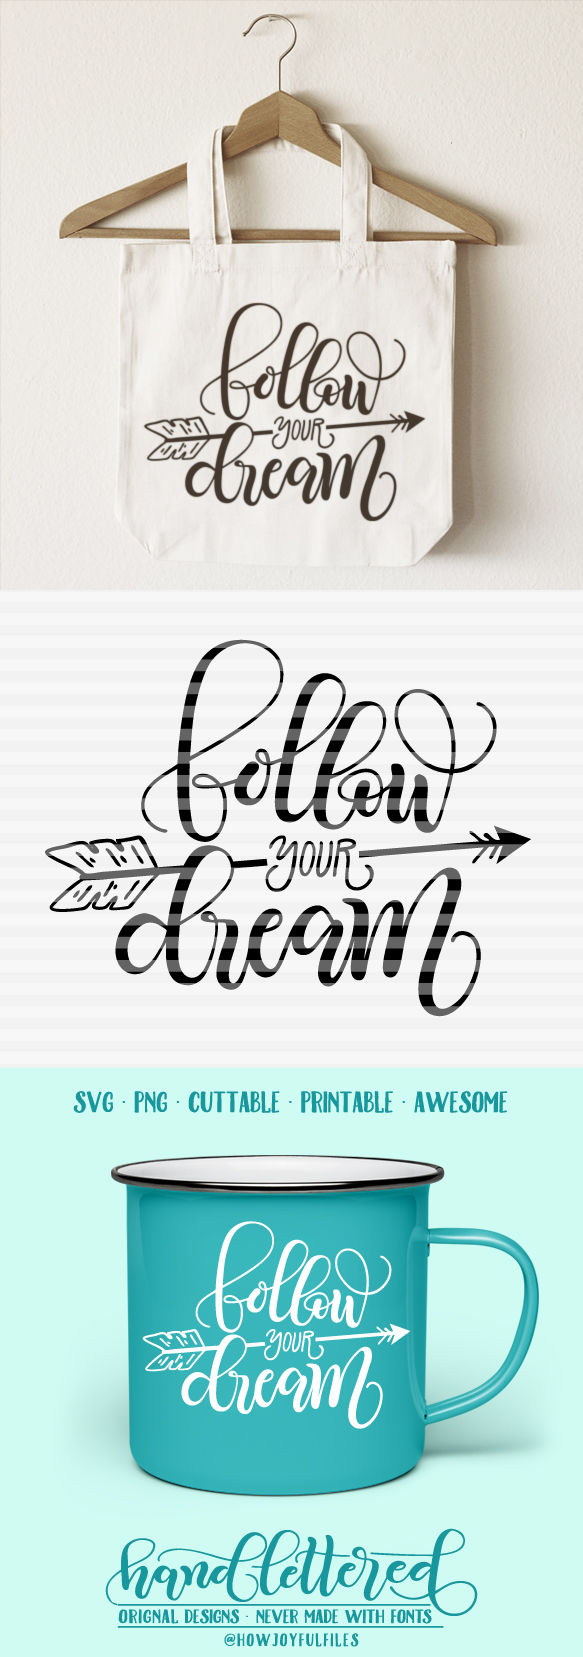 Follow your dream SVG hand drawn lettered cut file graphic overlay DXF PDF